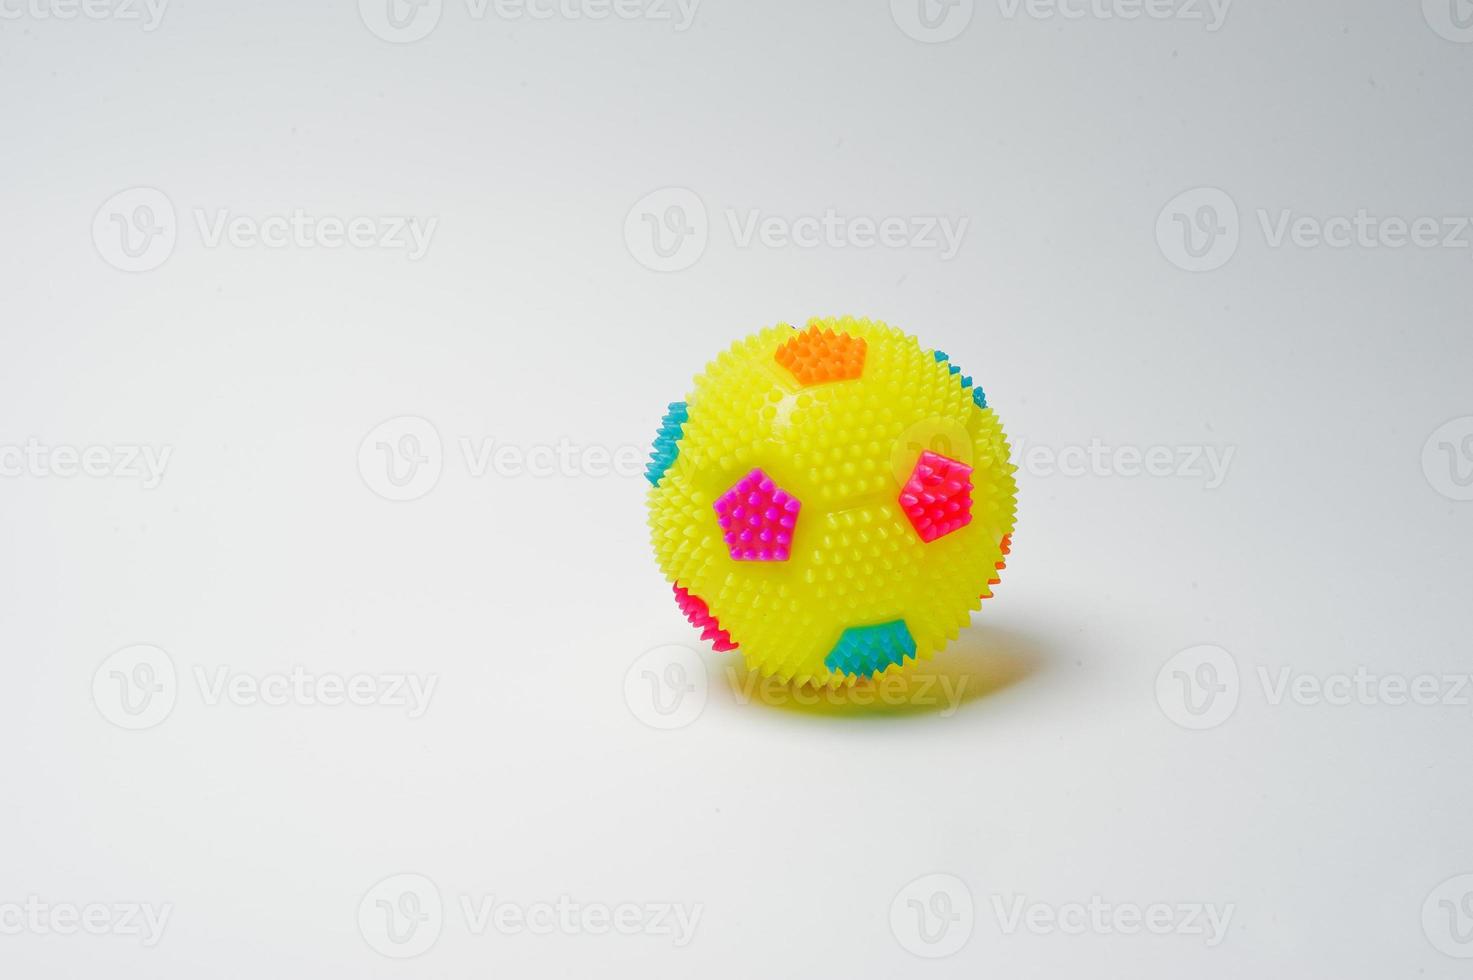 Close-up photo of a small yellow ball on a white background.